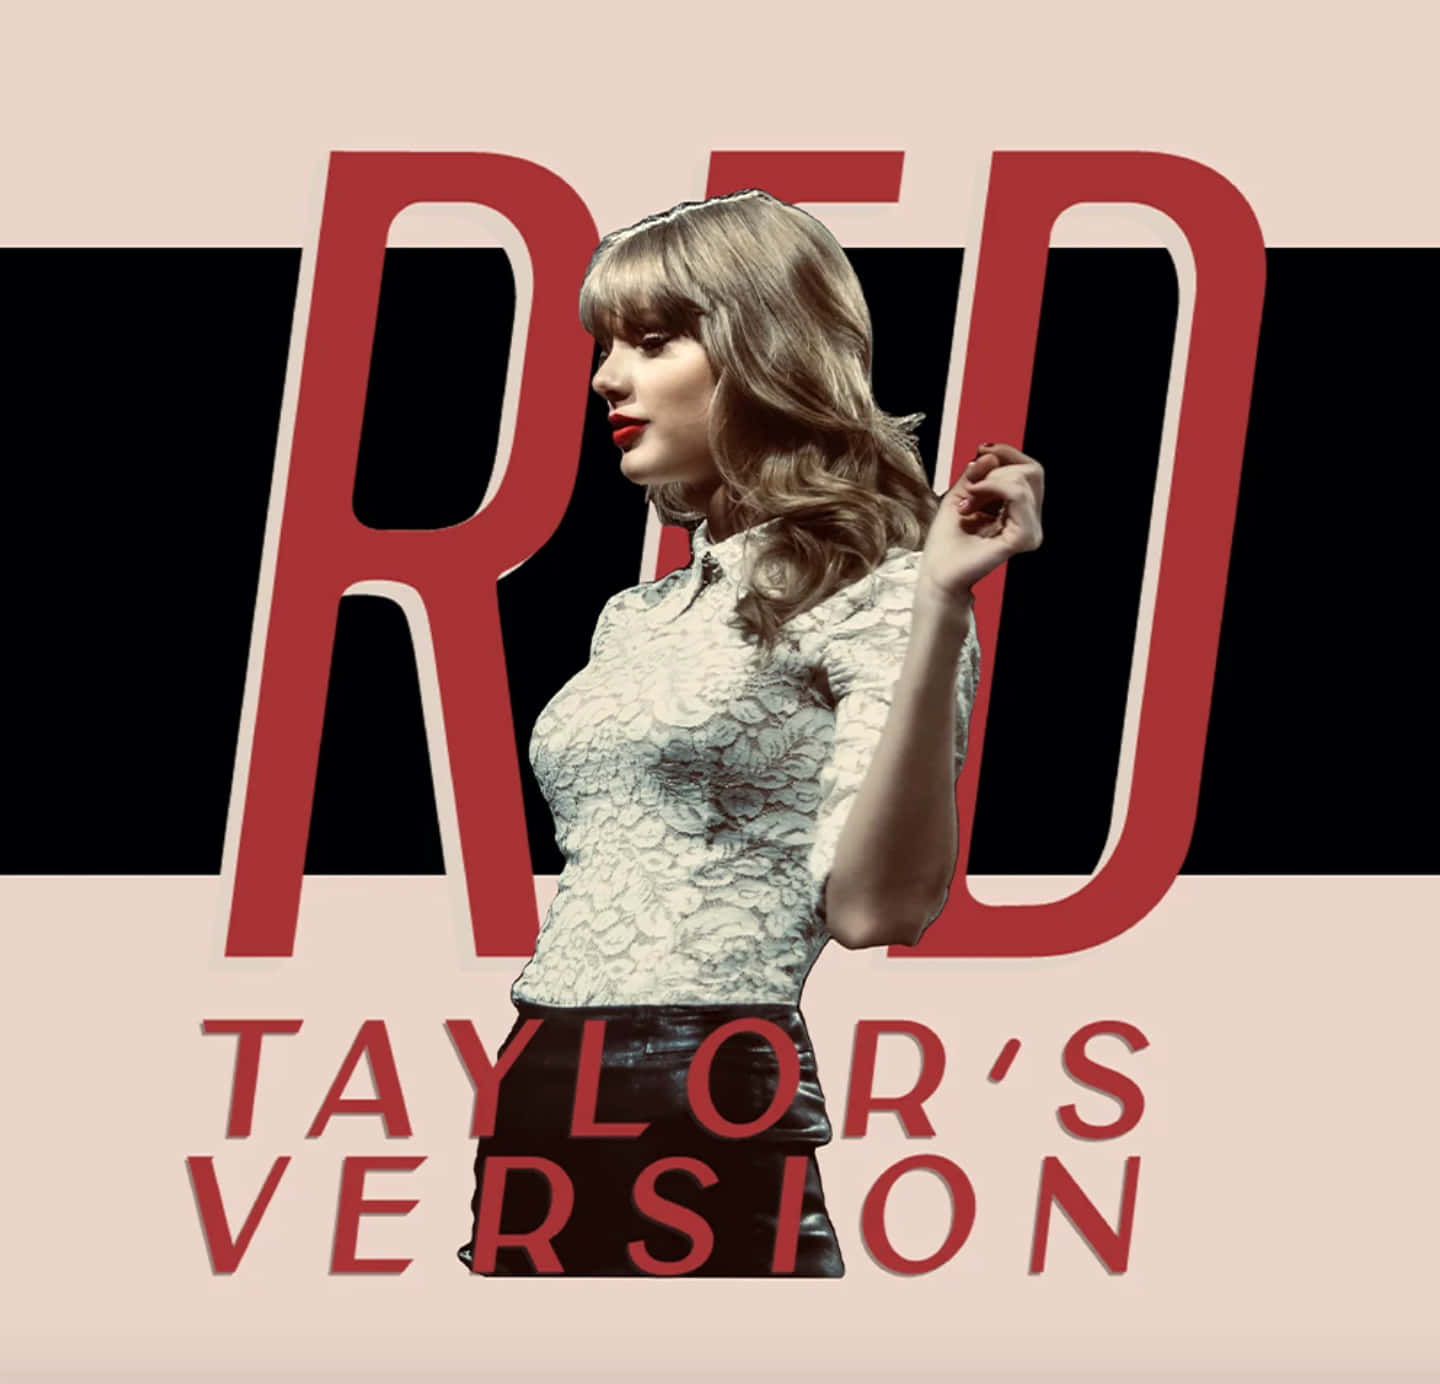 Download Red Taylors Version Aesthetic Album Cover Wallpaper